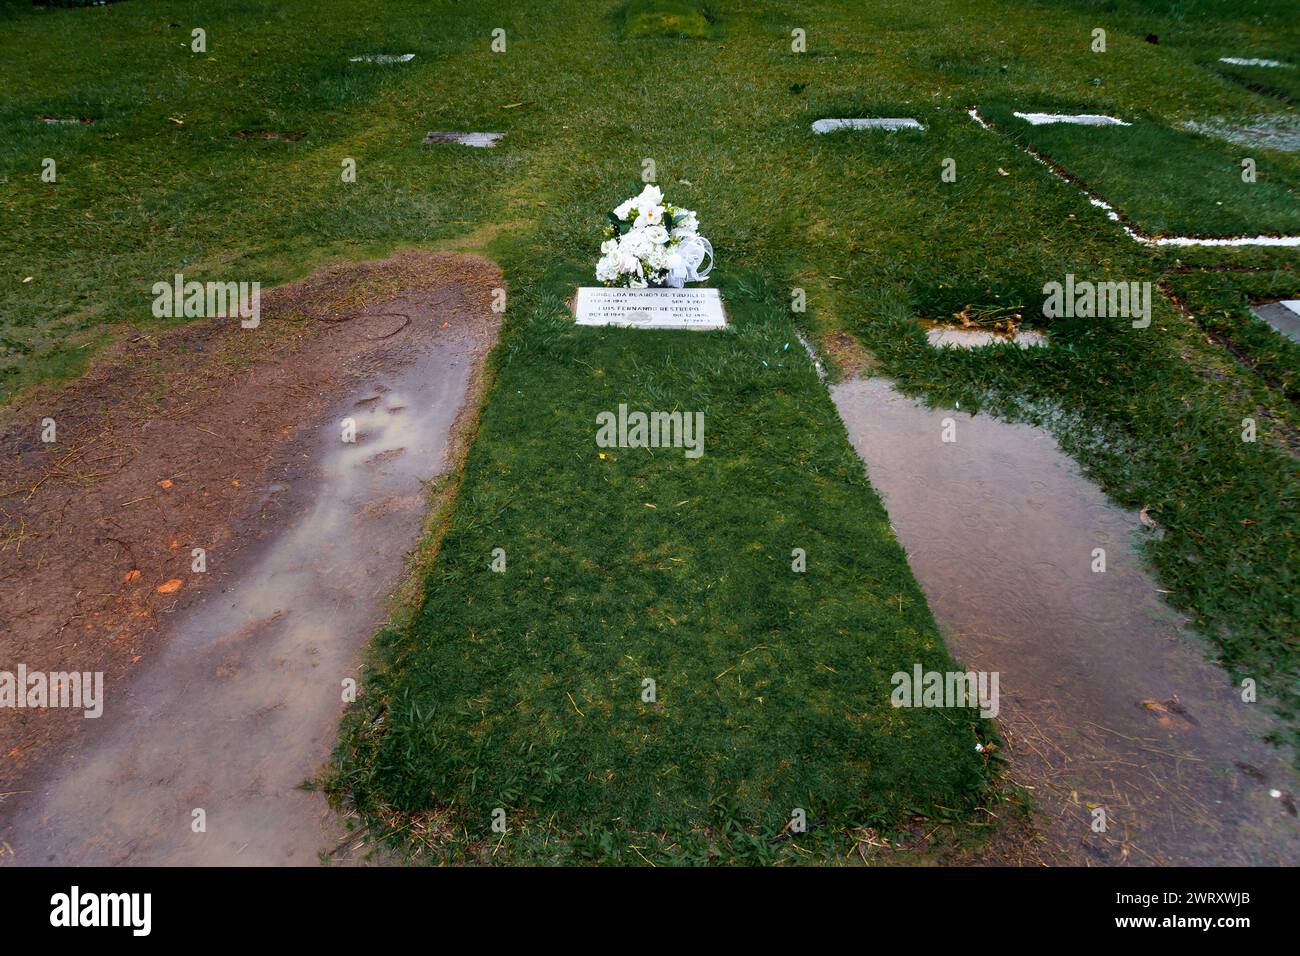 Medellin, Colombia - January 11, 2023: Grave of Griselda Blanco surrounded by water Stock Photo